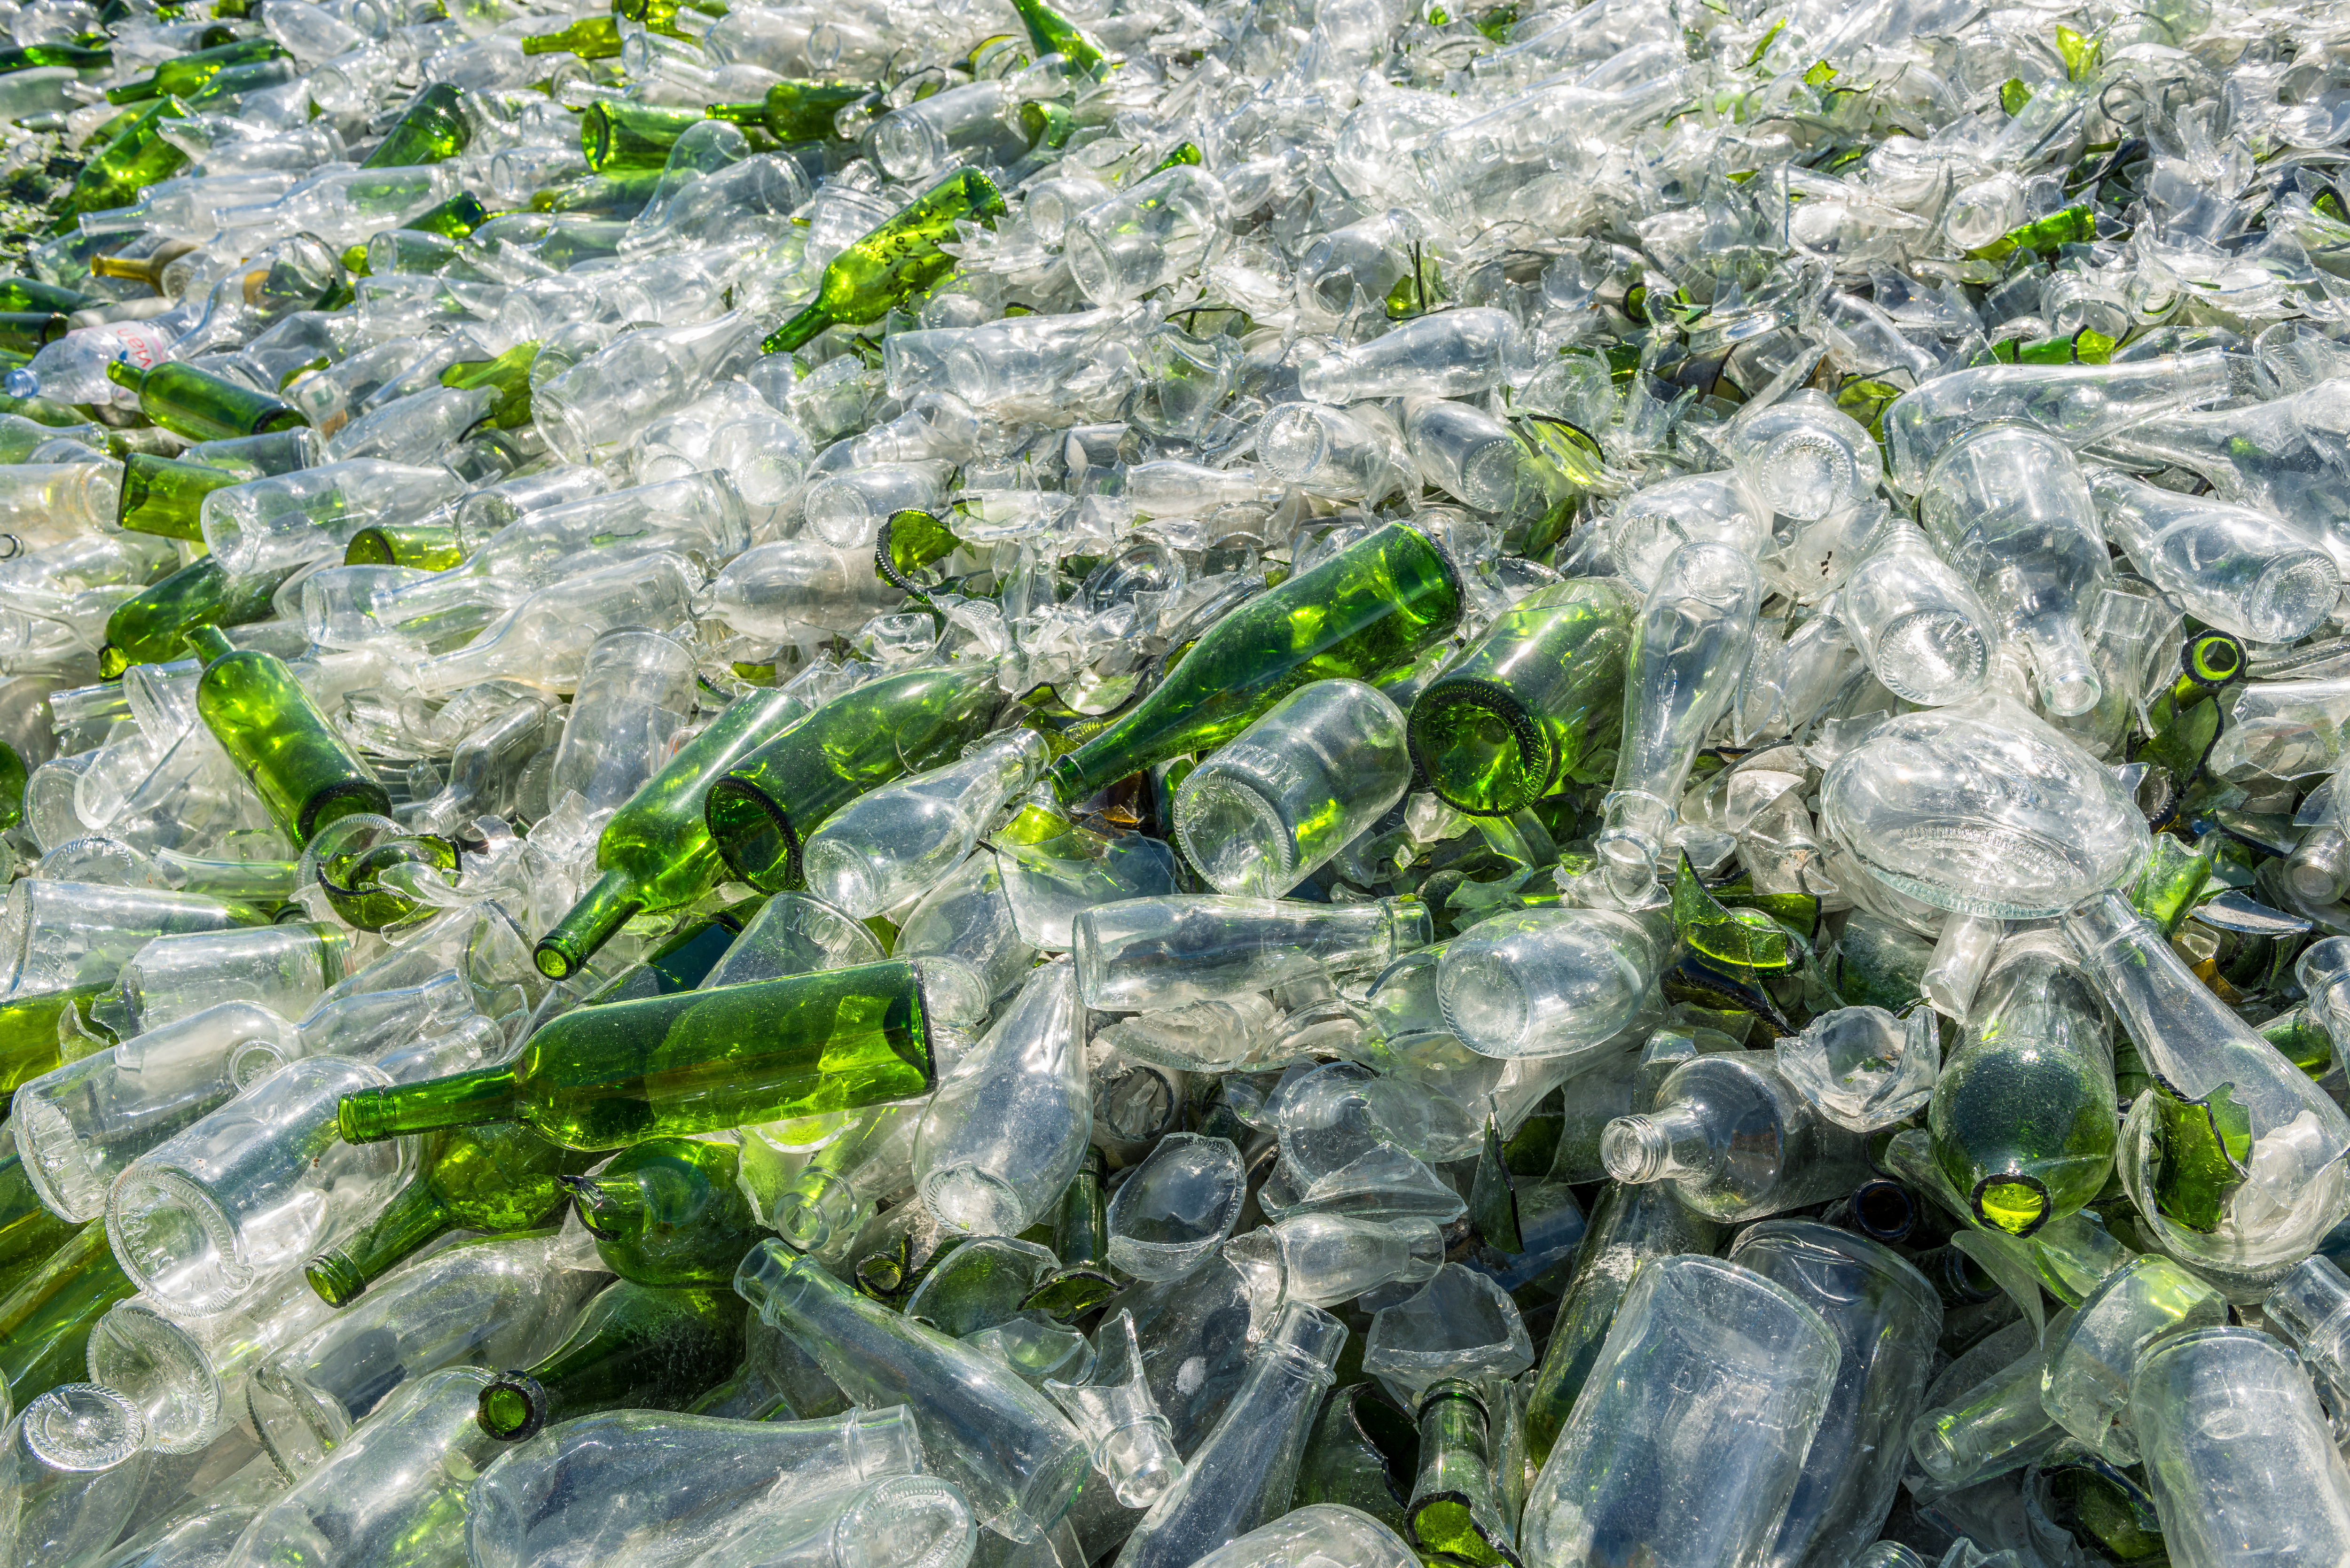 New Infinitely-Recyclable Plastic Could Potentially Solve the